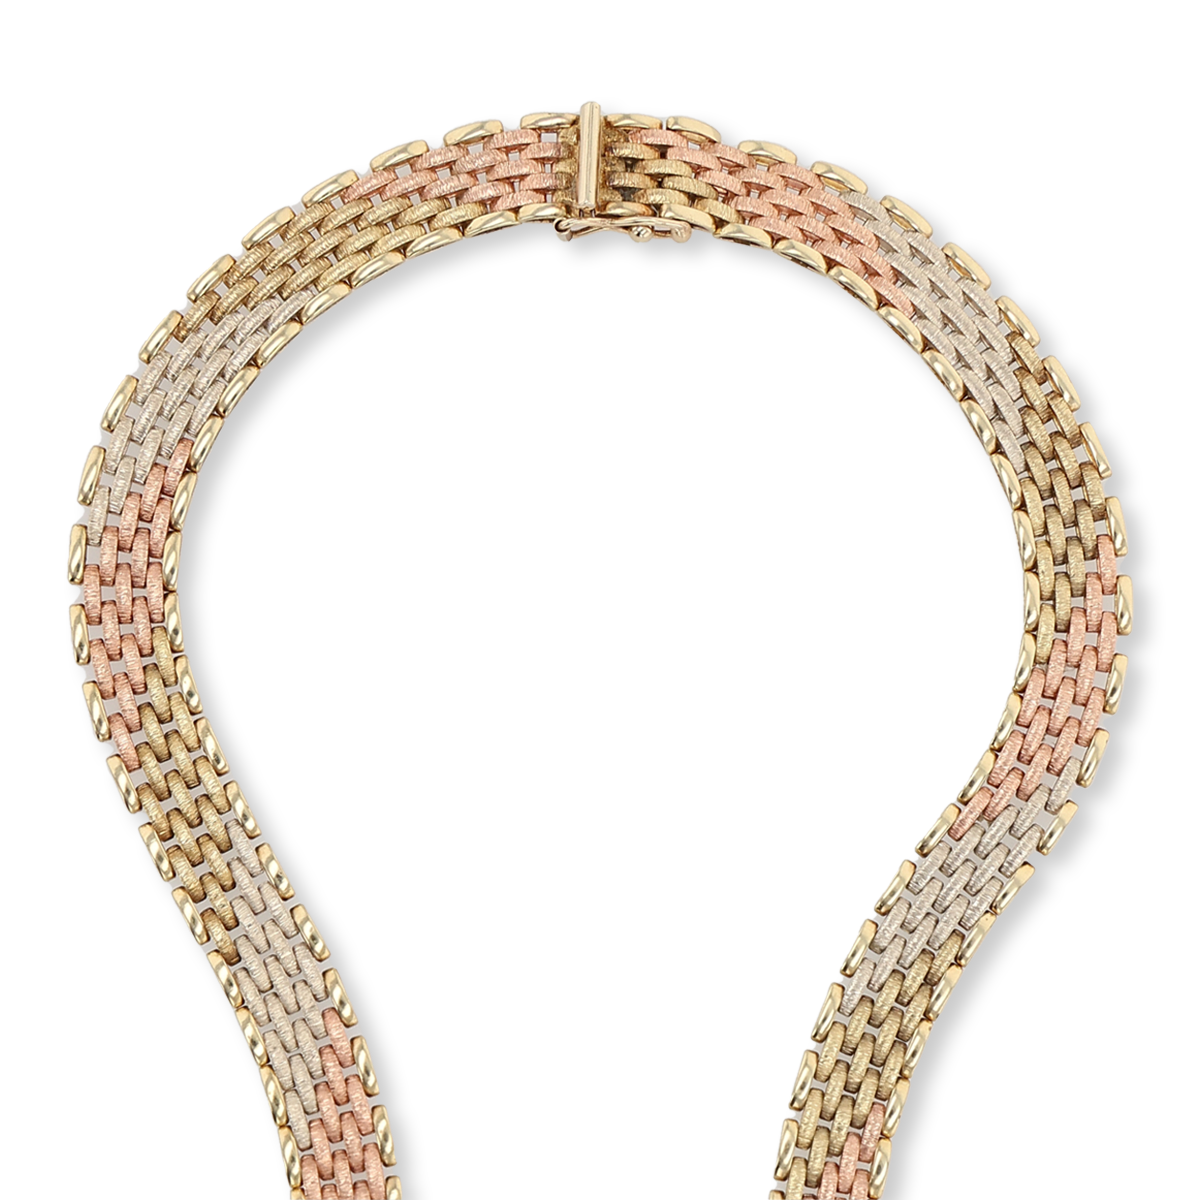 9ct Three Colour Gold Brick Link Necklace